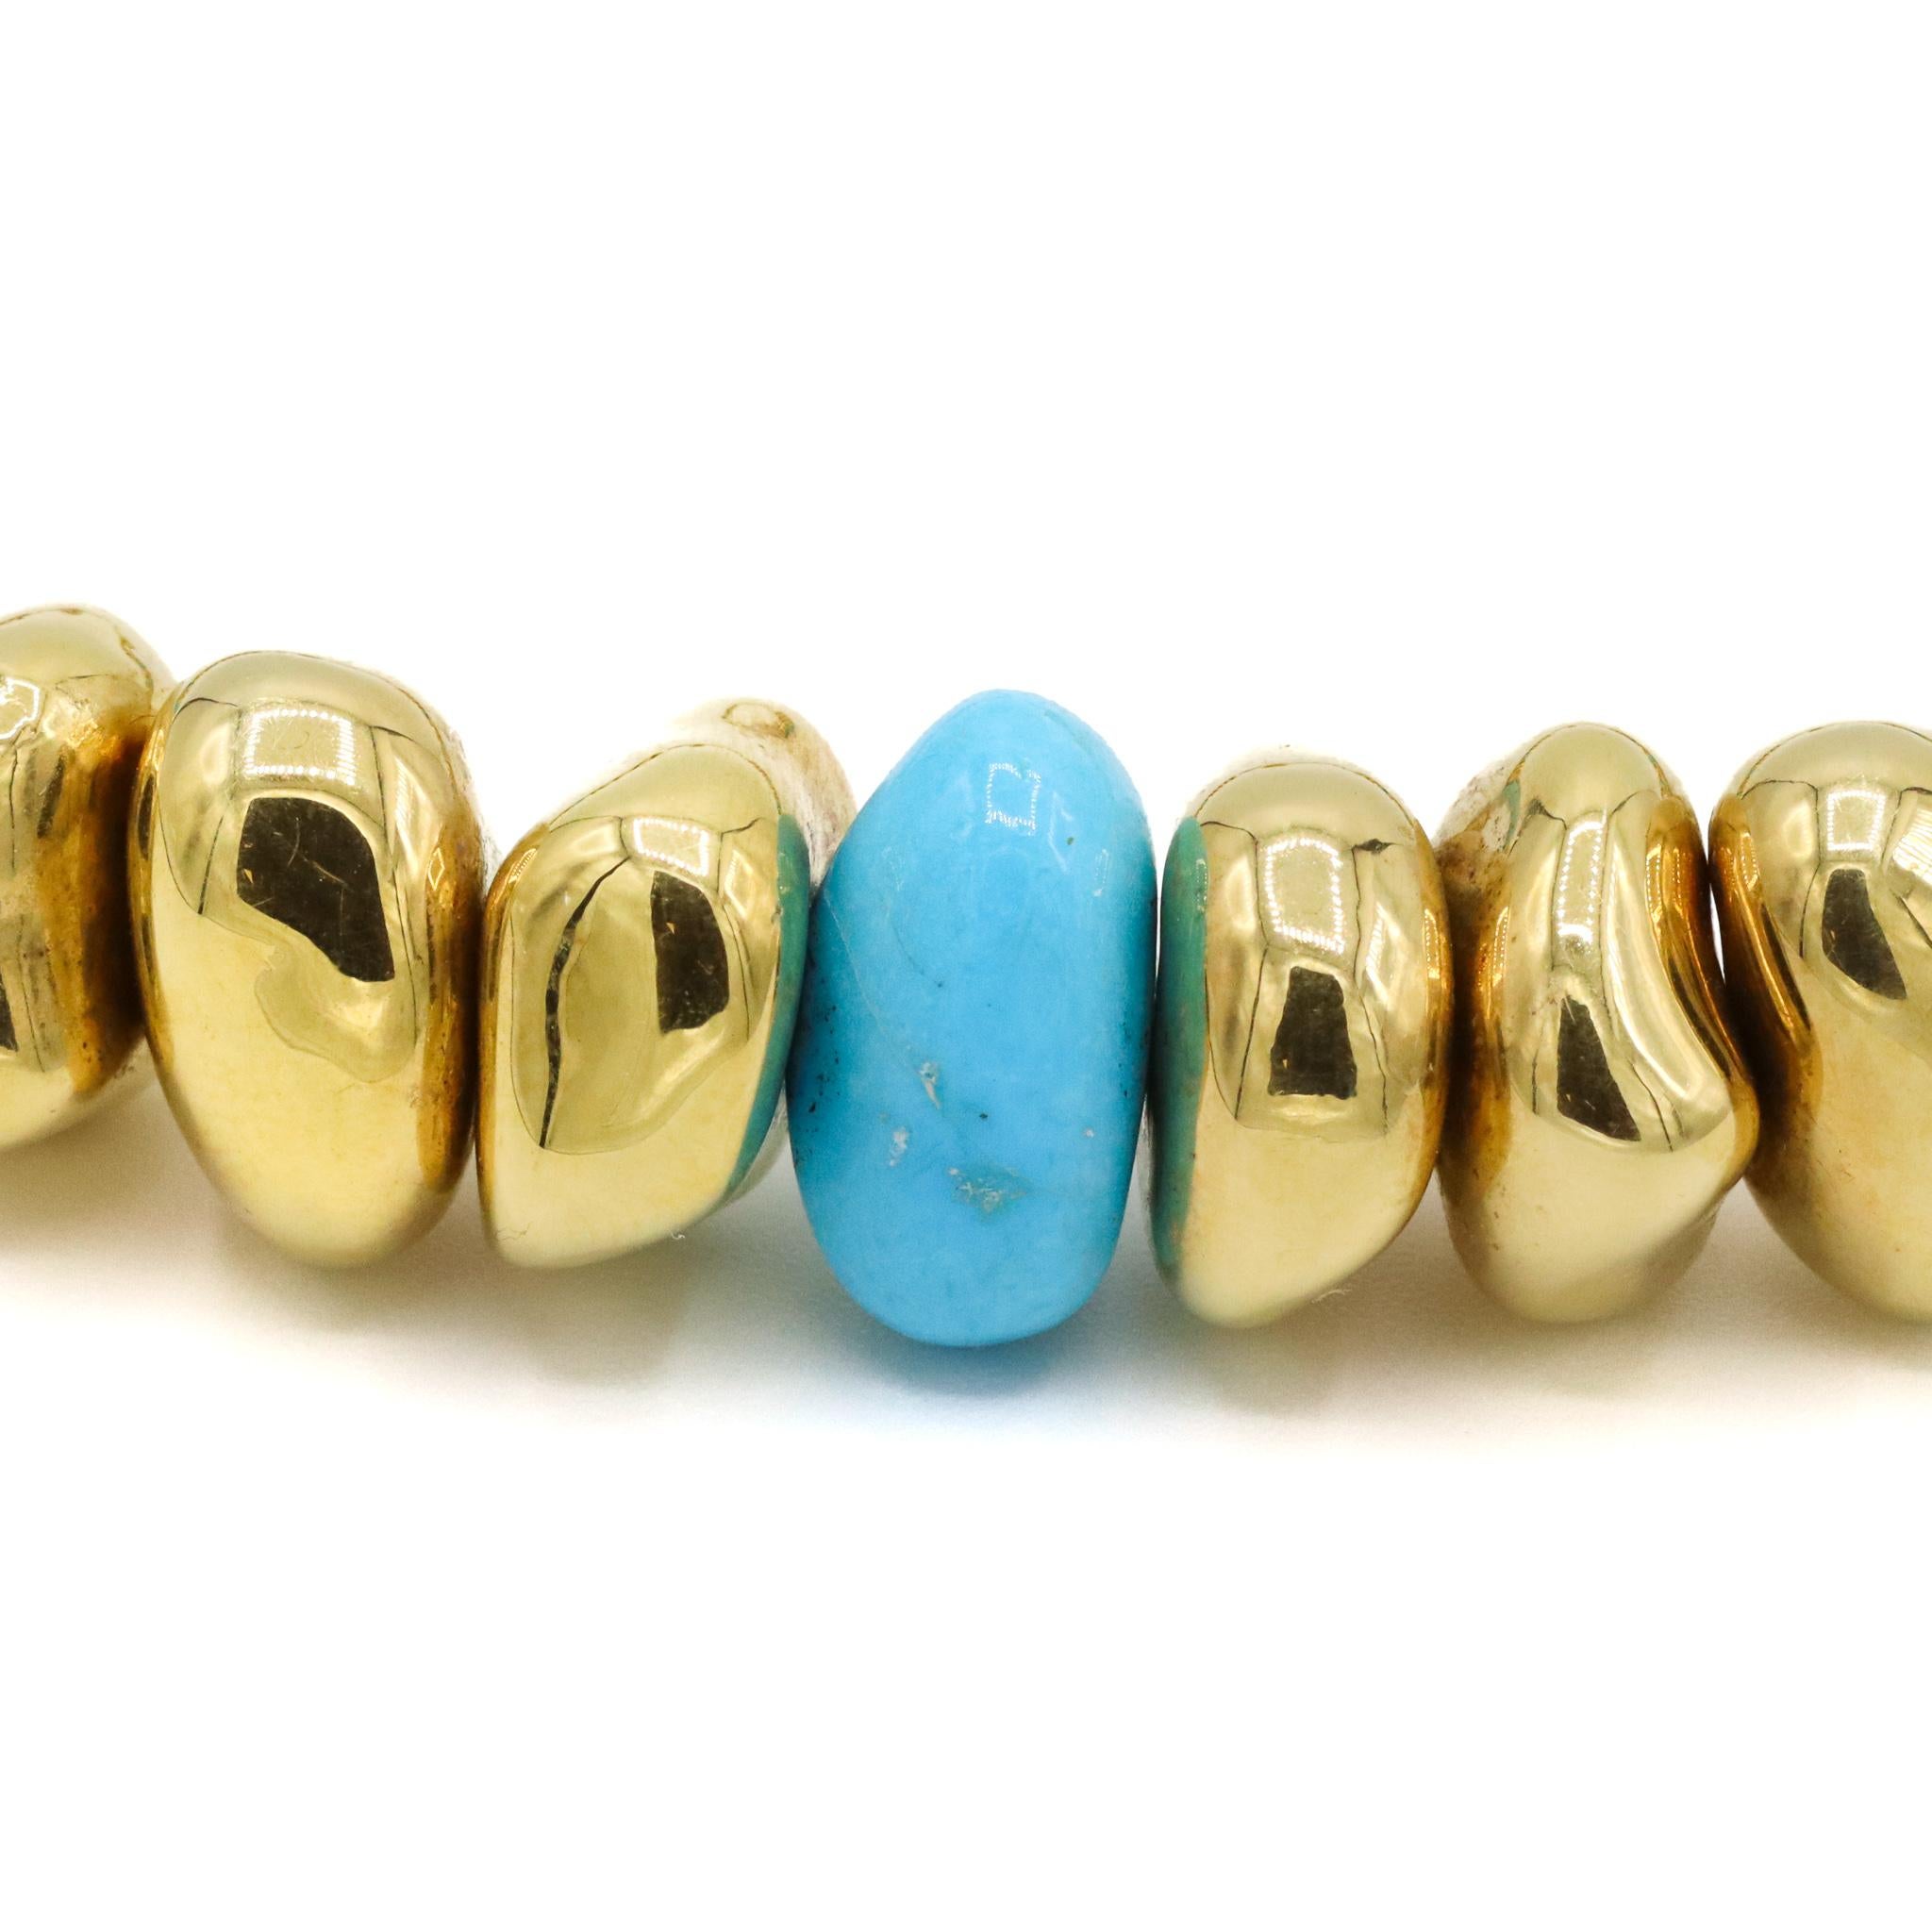 One lady's hand made polished 18K yellow gold choker, turquoise bead necklace. The necklace measures approximately 17.00 inches in length by 13.07mm tapering to 11.51mm in width and weighs a total of 68.30 grams. Engraved with 